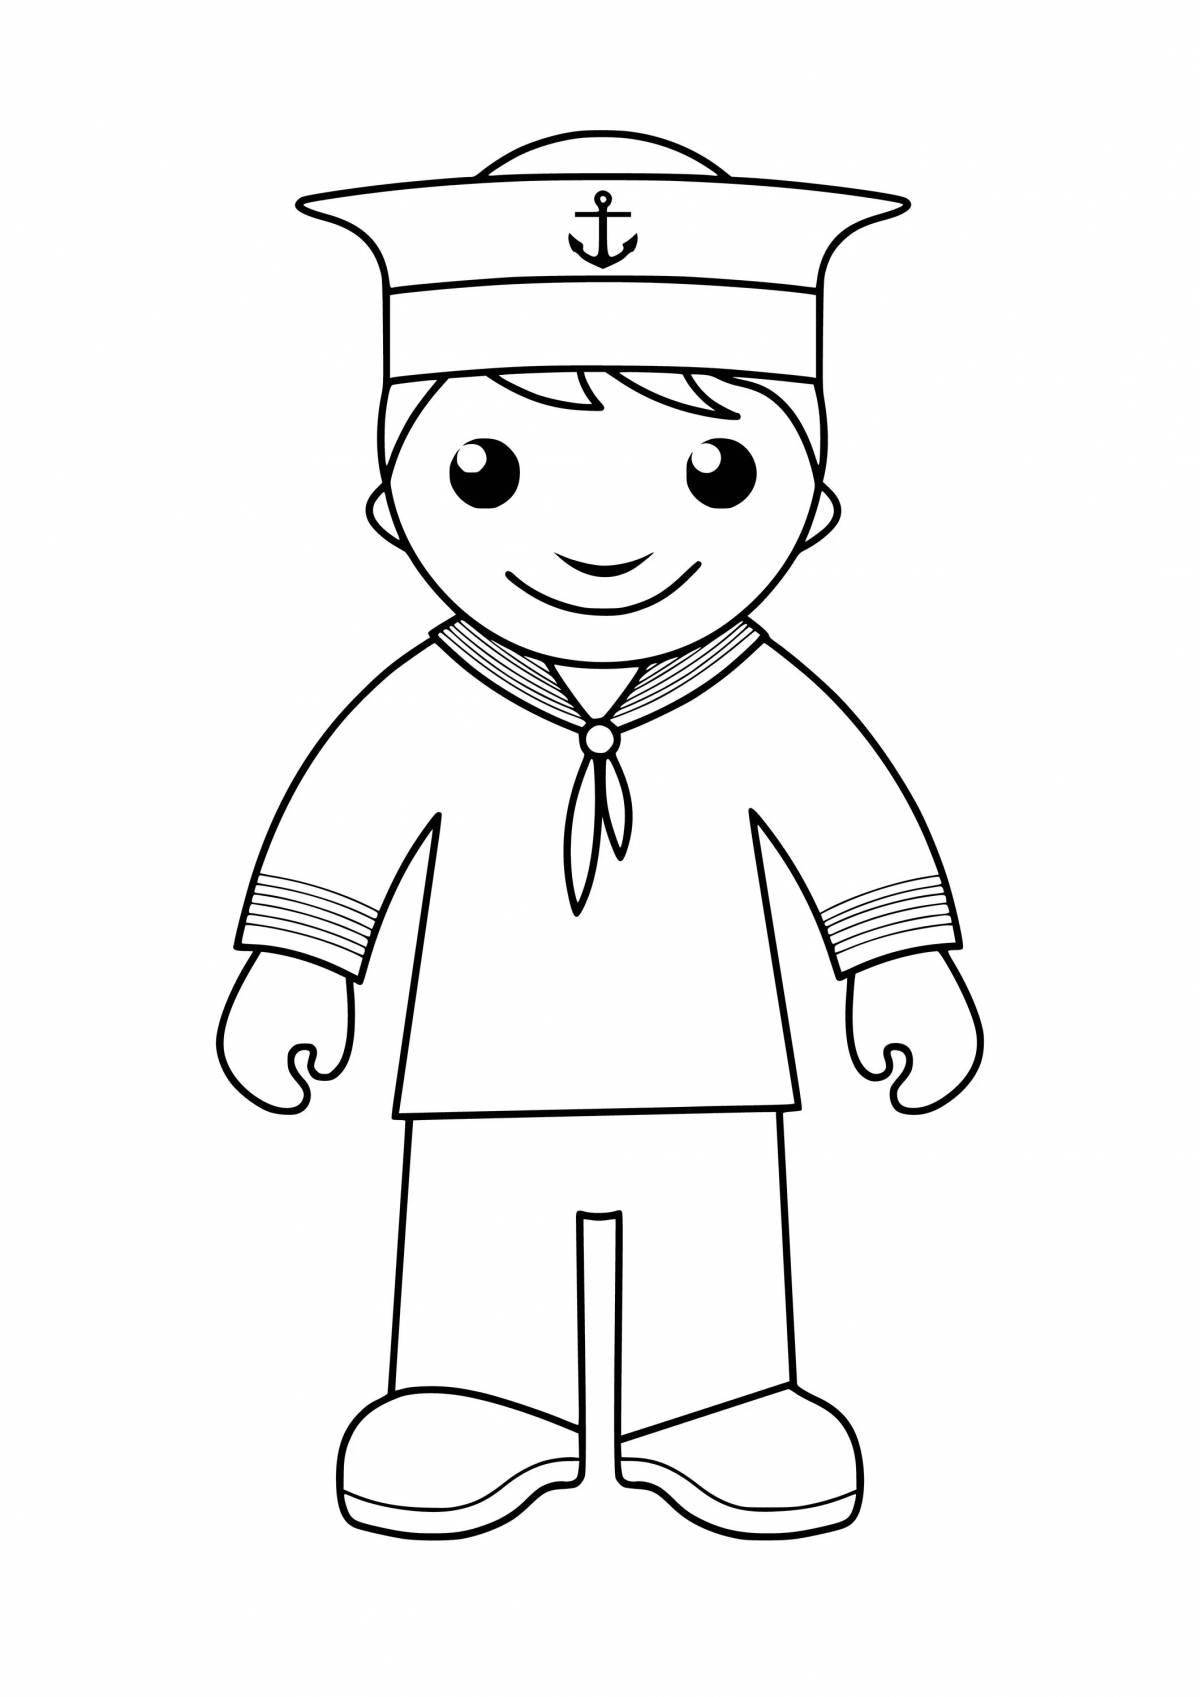 Coloring funny soldier for kids